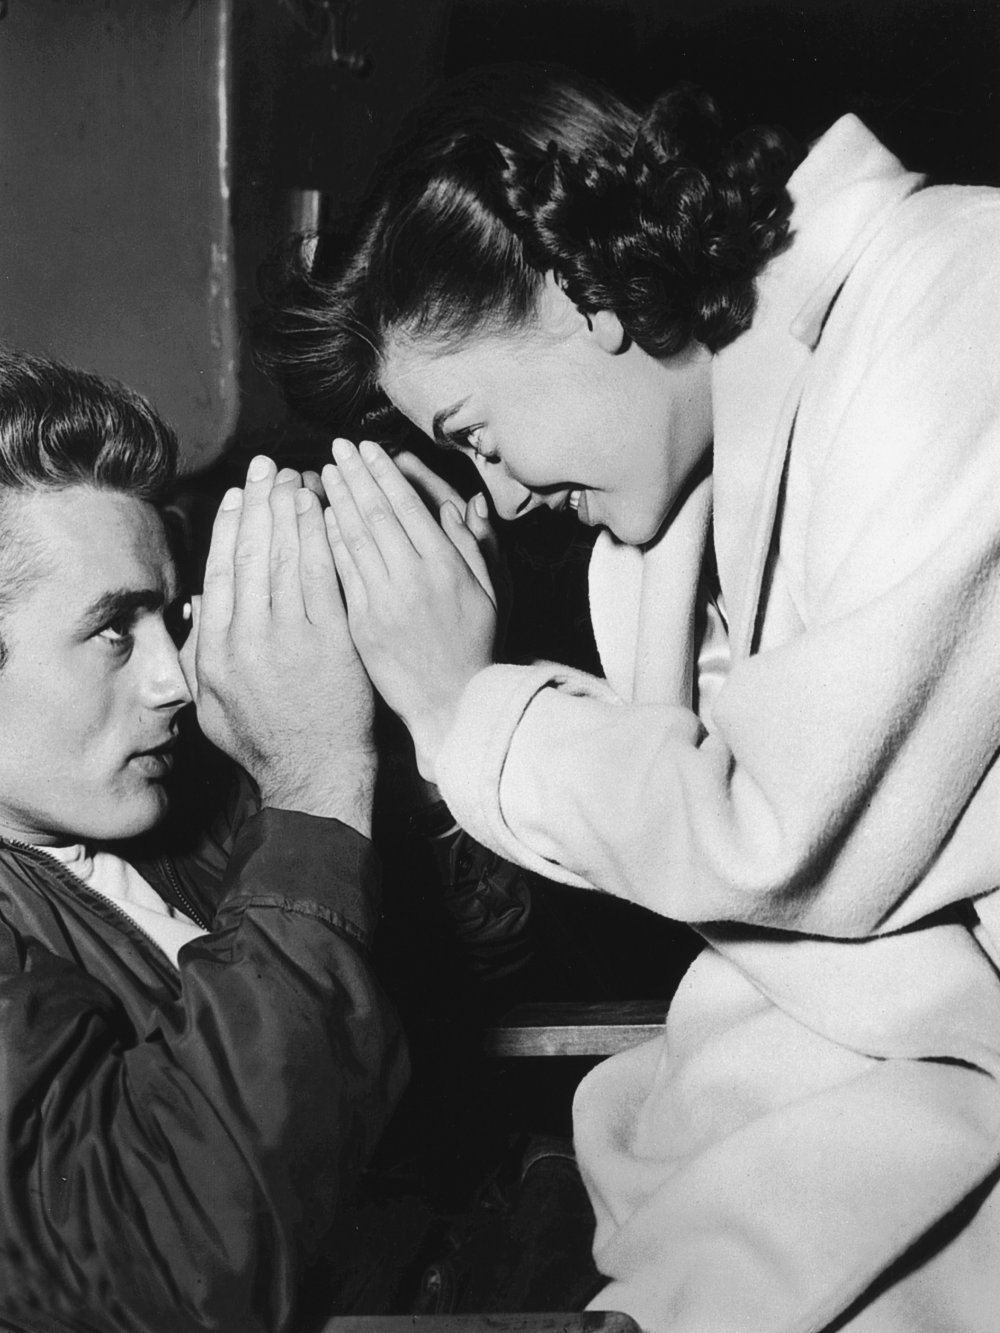 The two tragic stars of Rebel without a Cause – Dean and Natalie Wood – share a moment between takes. Dean died in a car crash in 1955, one month before the film was released; he was 24. Wood drowned in 1981, aged 43.